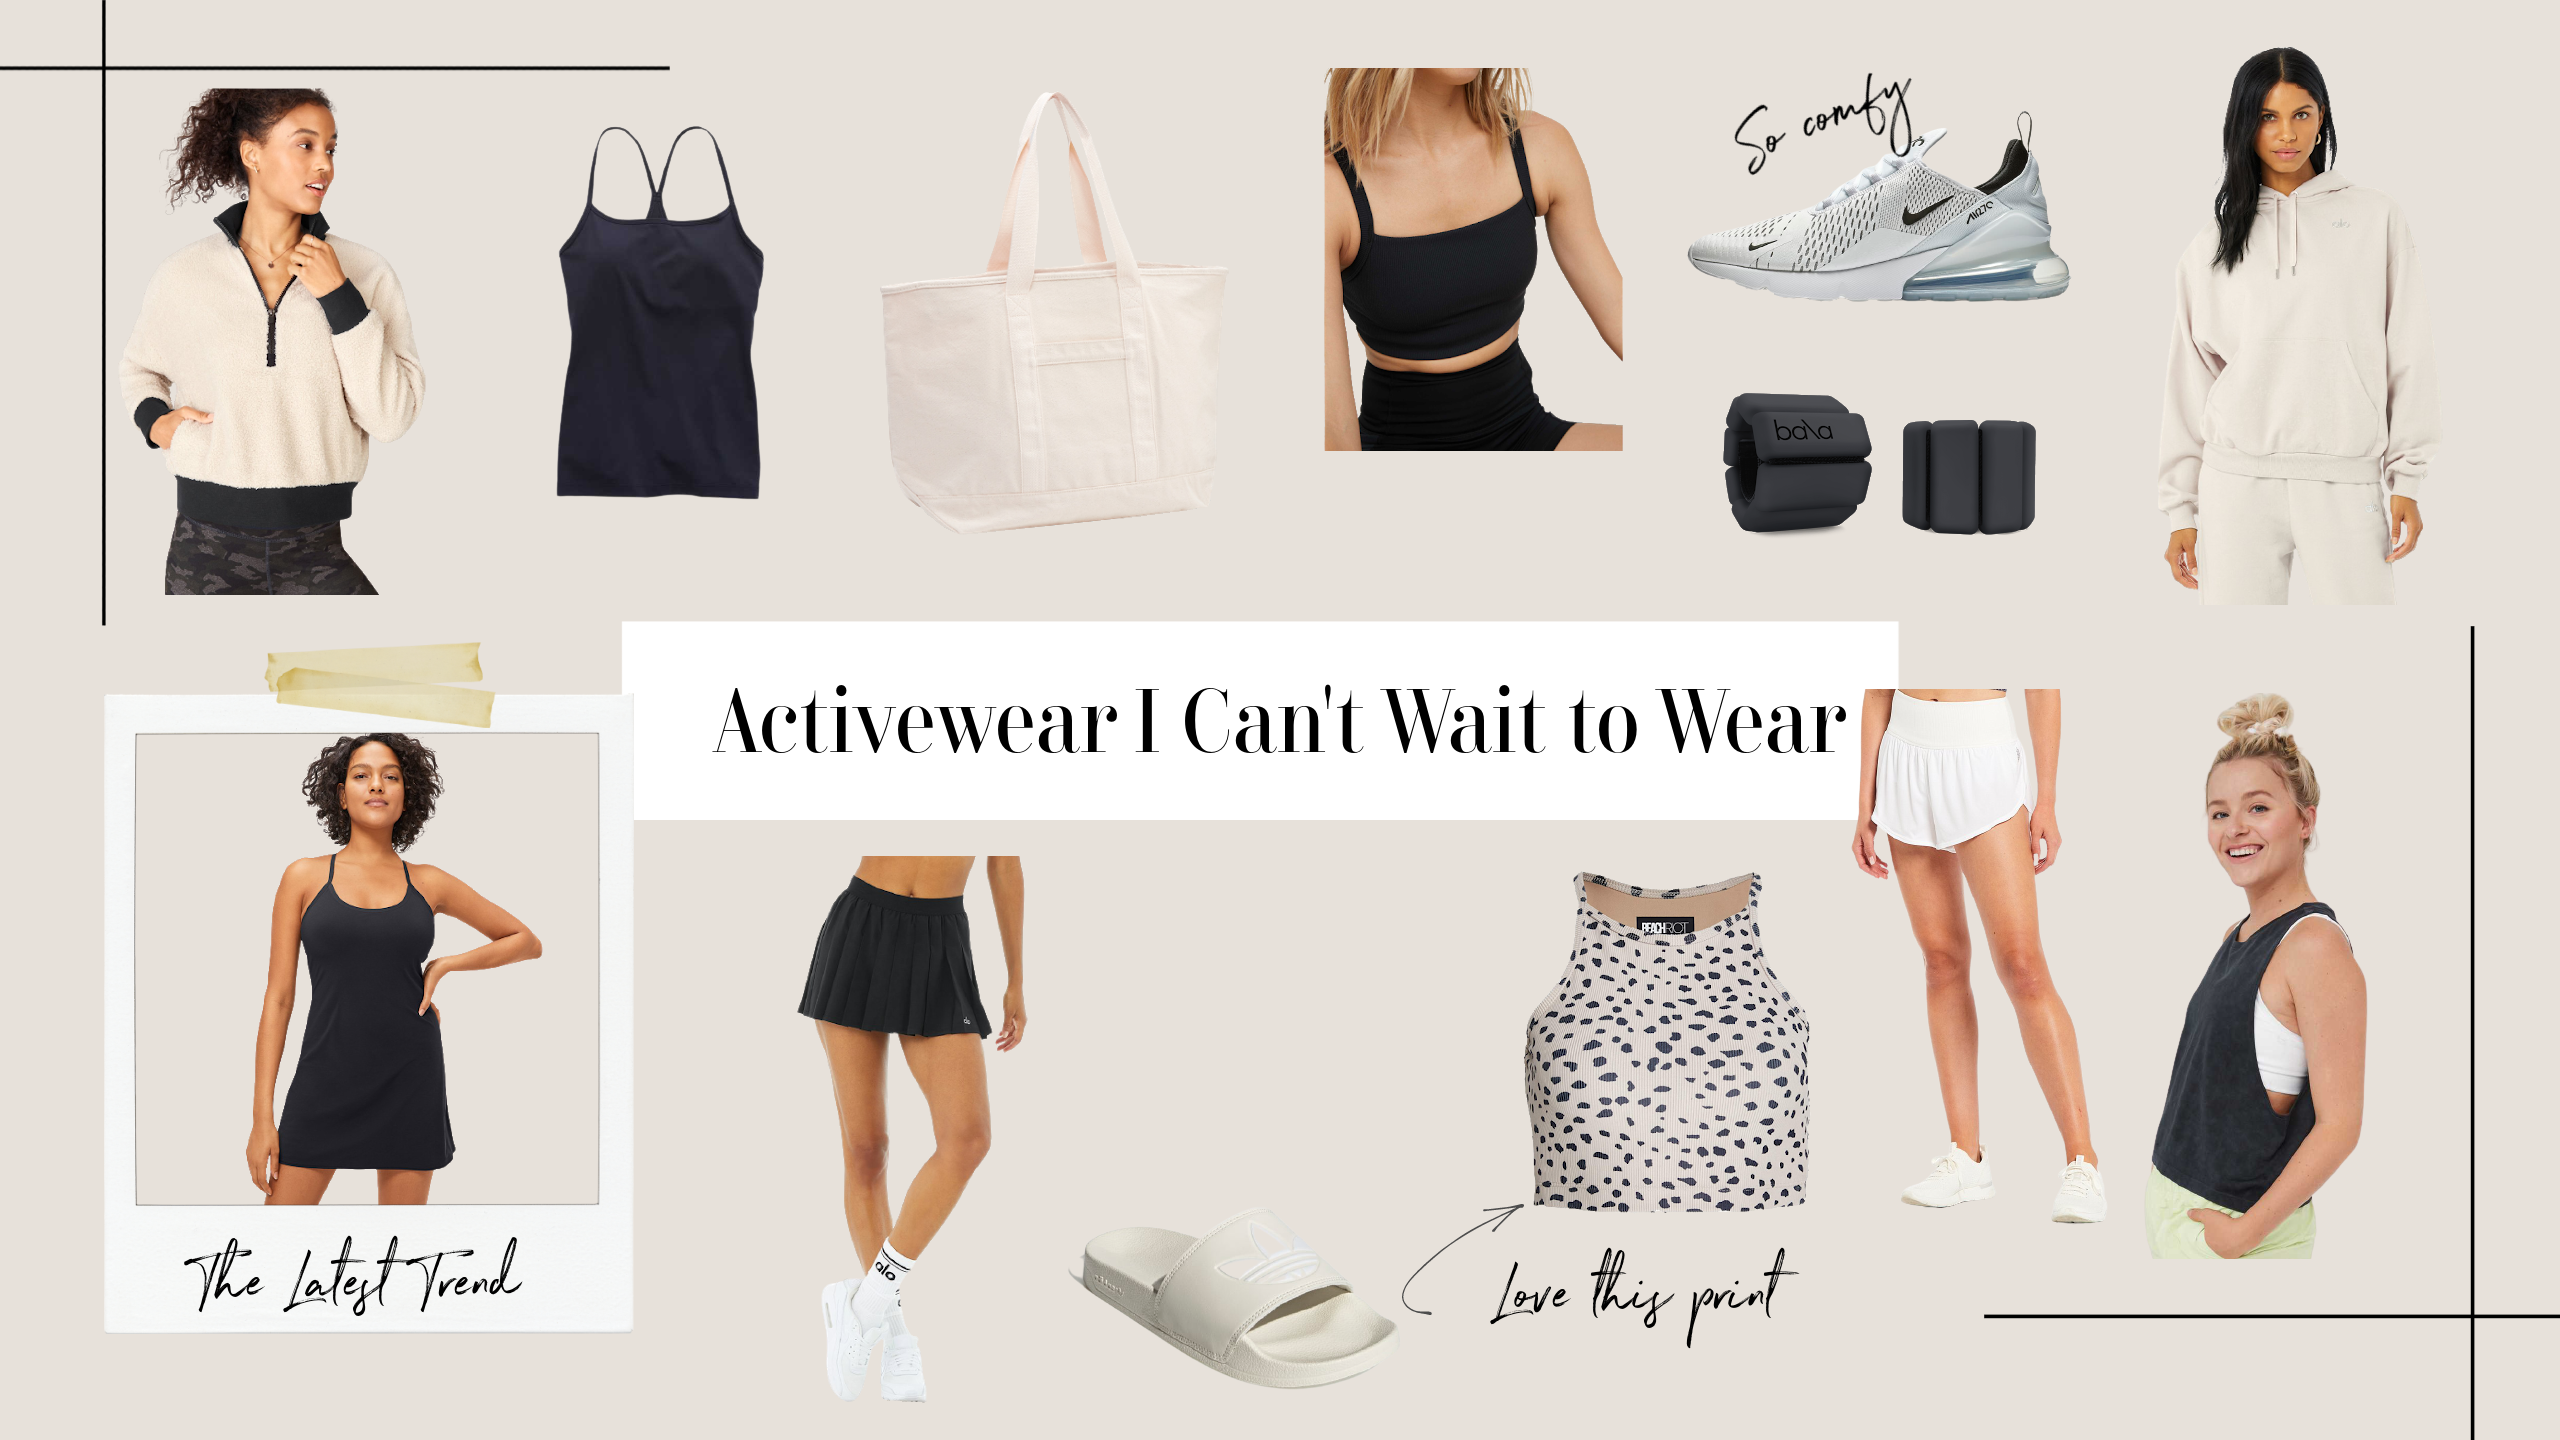 Activewear I Can’t Wait to Wear